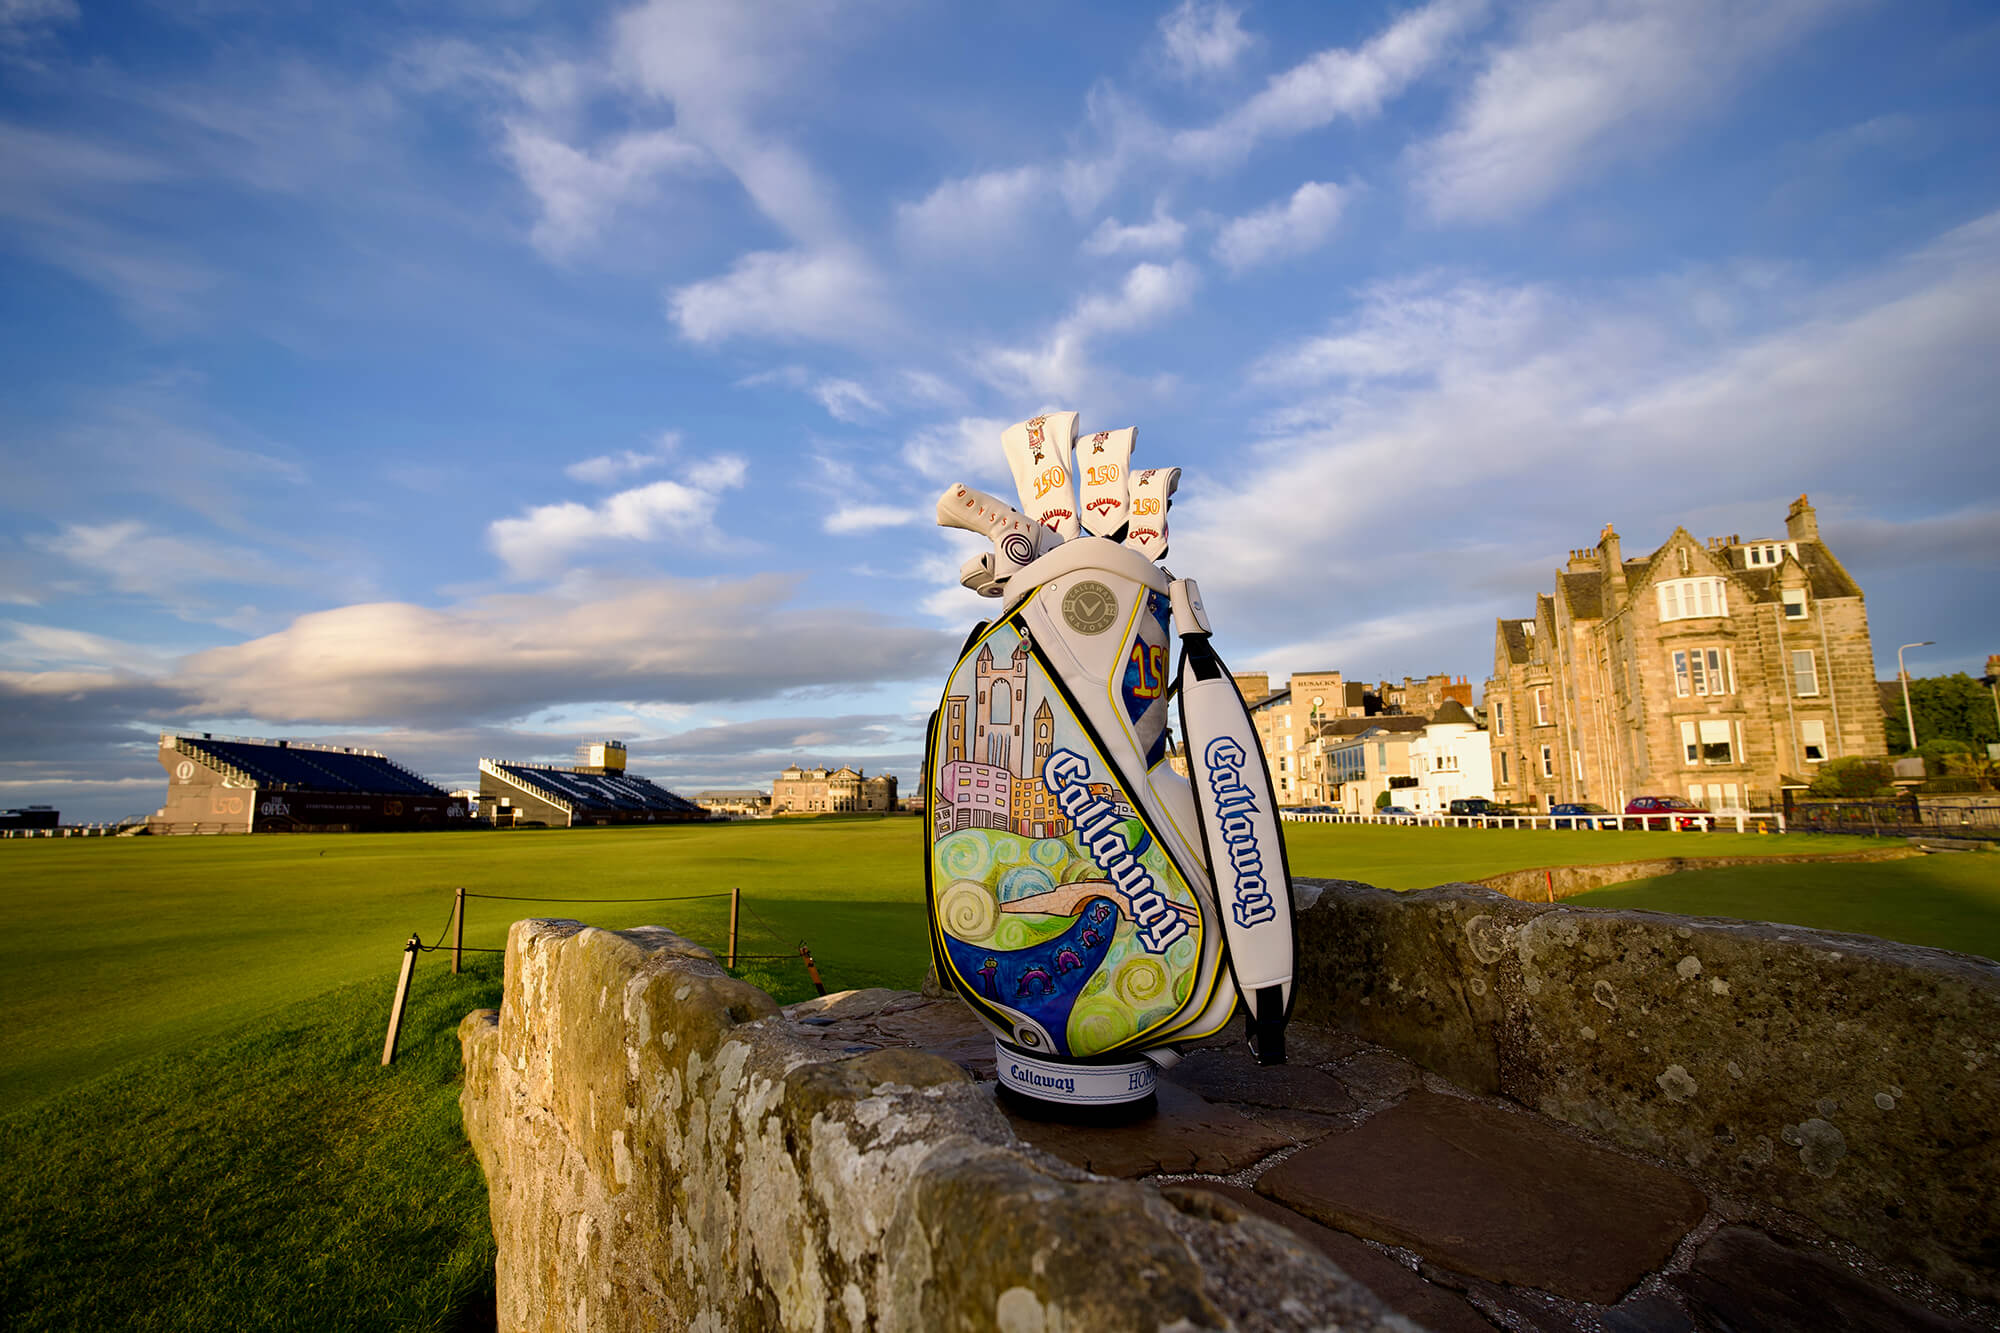 WIN! A limited edition Open Callaway tour bag